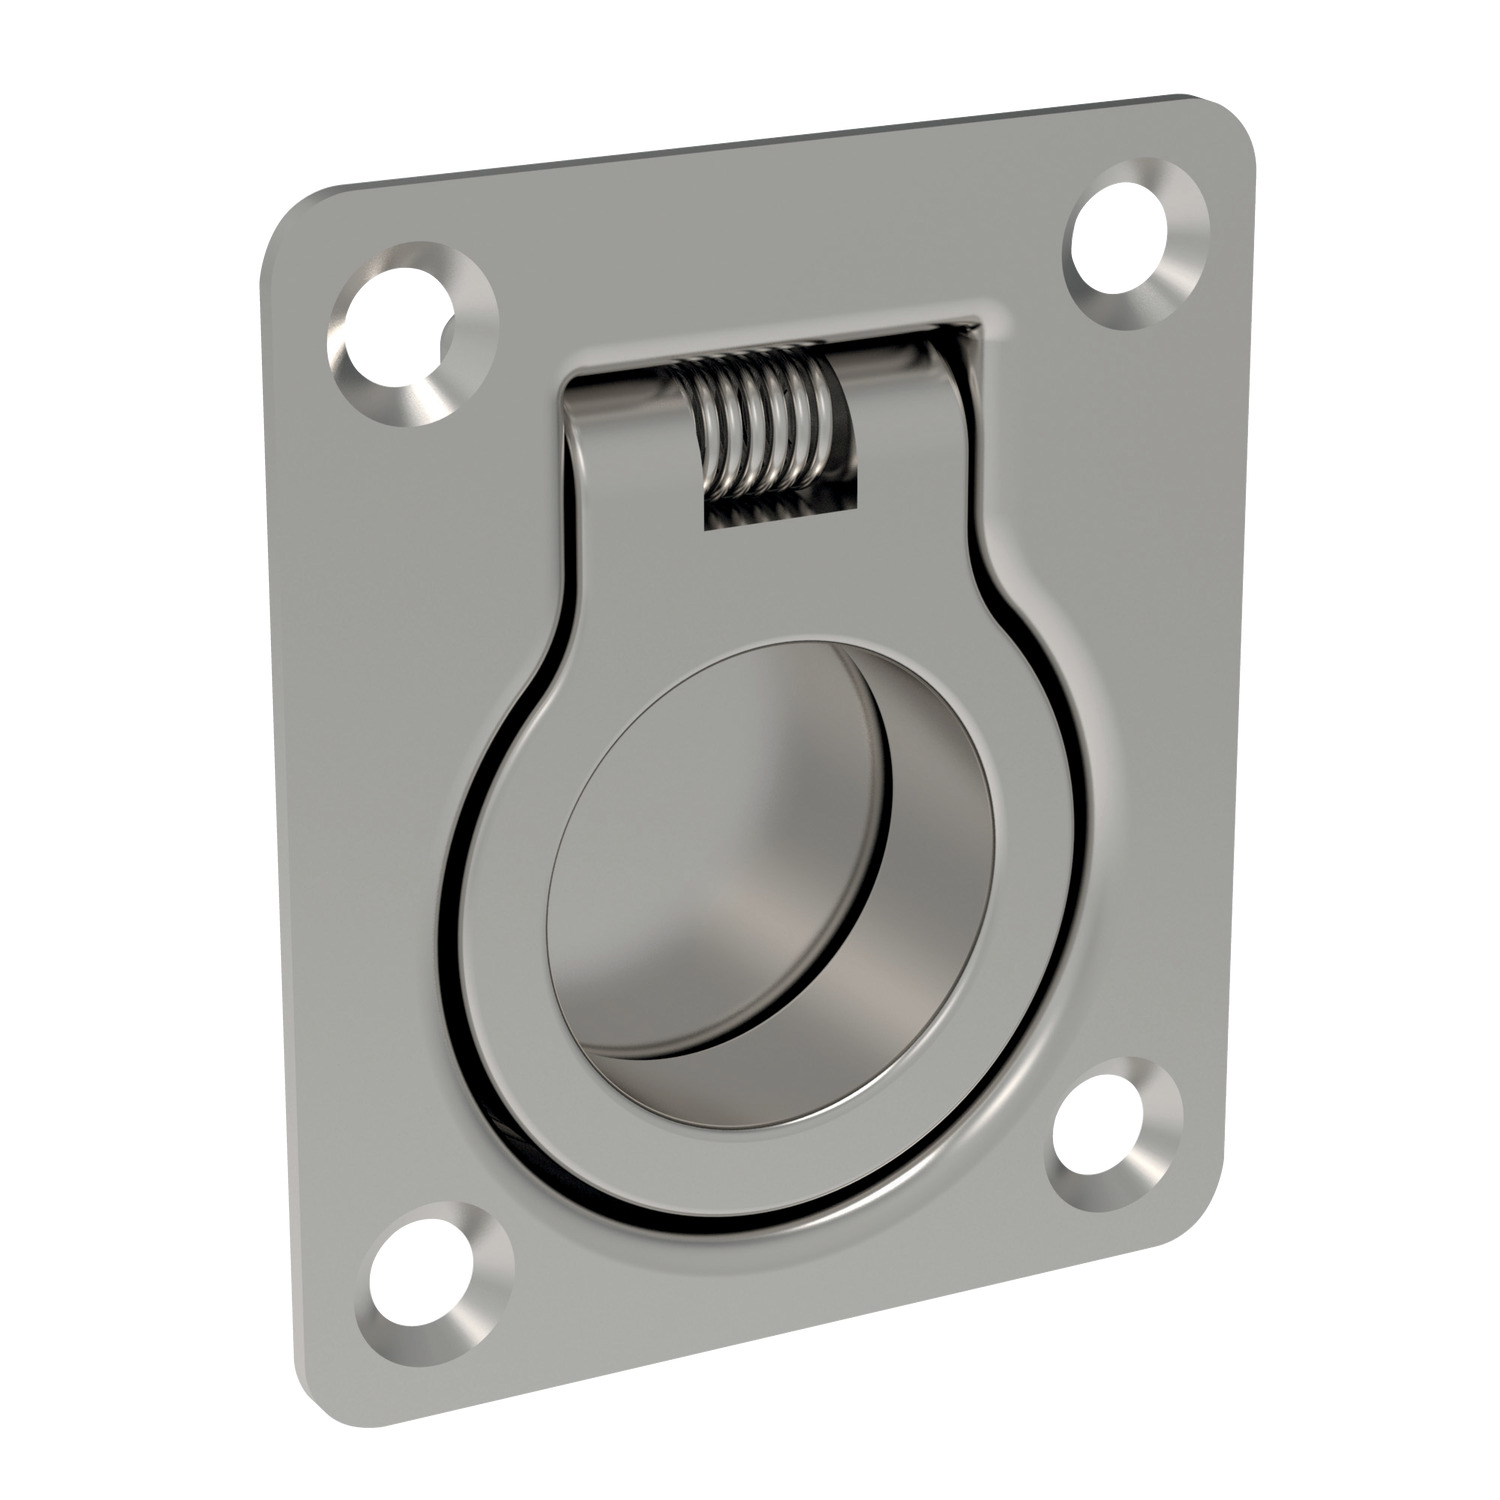 79720.W0010 Ring Pulls, Recessed - Stainless Steel 38 - 18 - 24,5 - 44